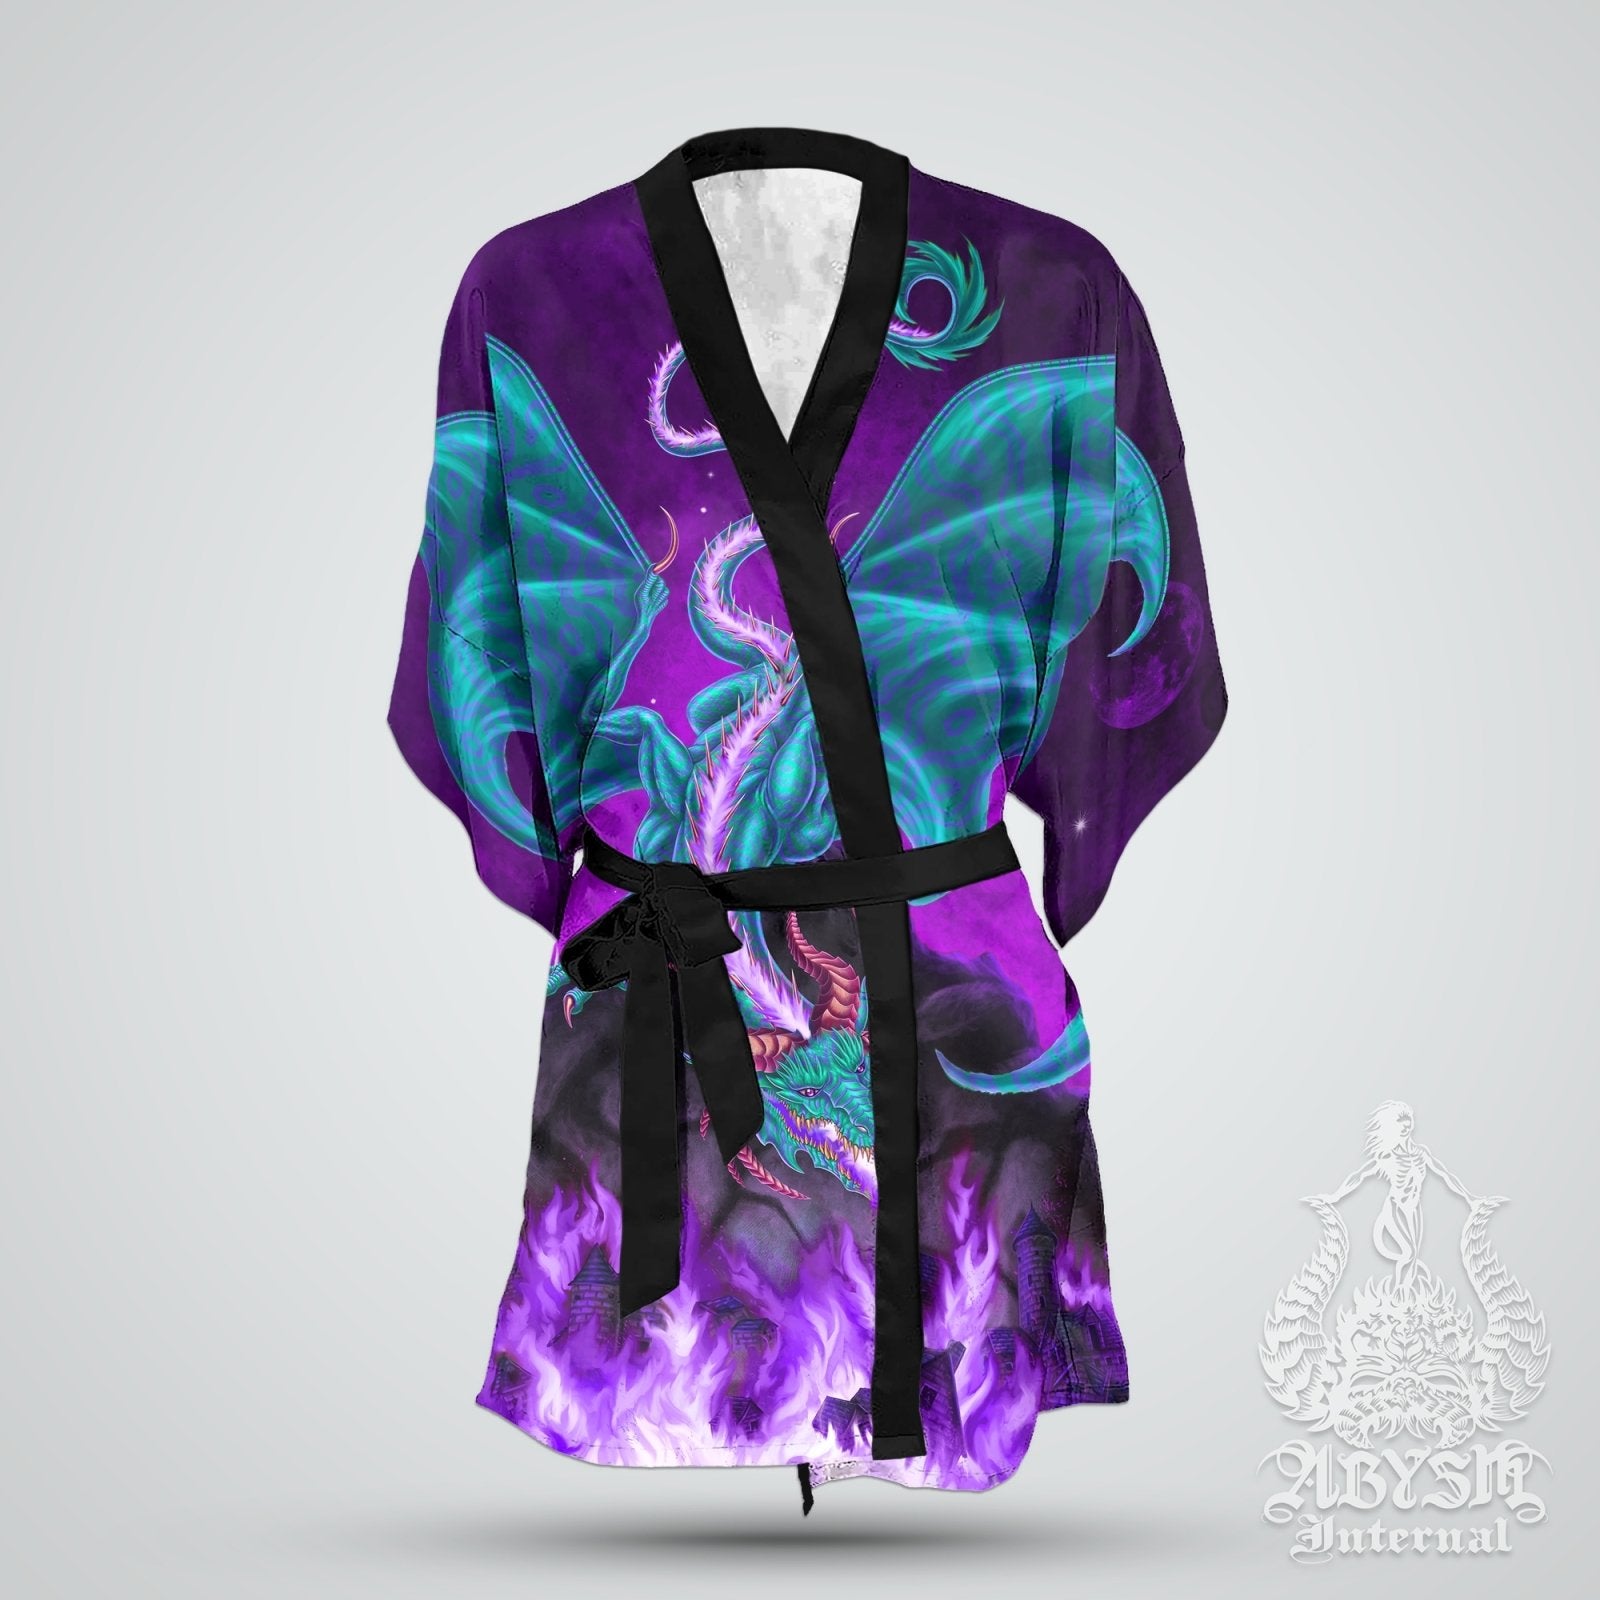 Dragon Kimono, Dressing Robe, Open Shirt, Festival Outfit, Alternative Clothing, Fantasy Summer Streetwear, Unisex - Veal and Purple Fire - Abysm Internal